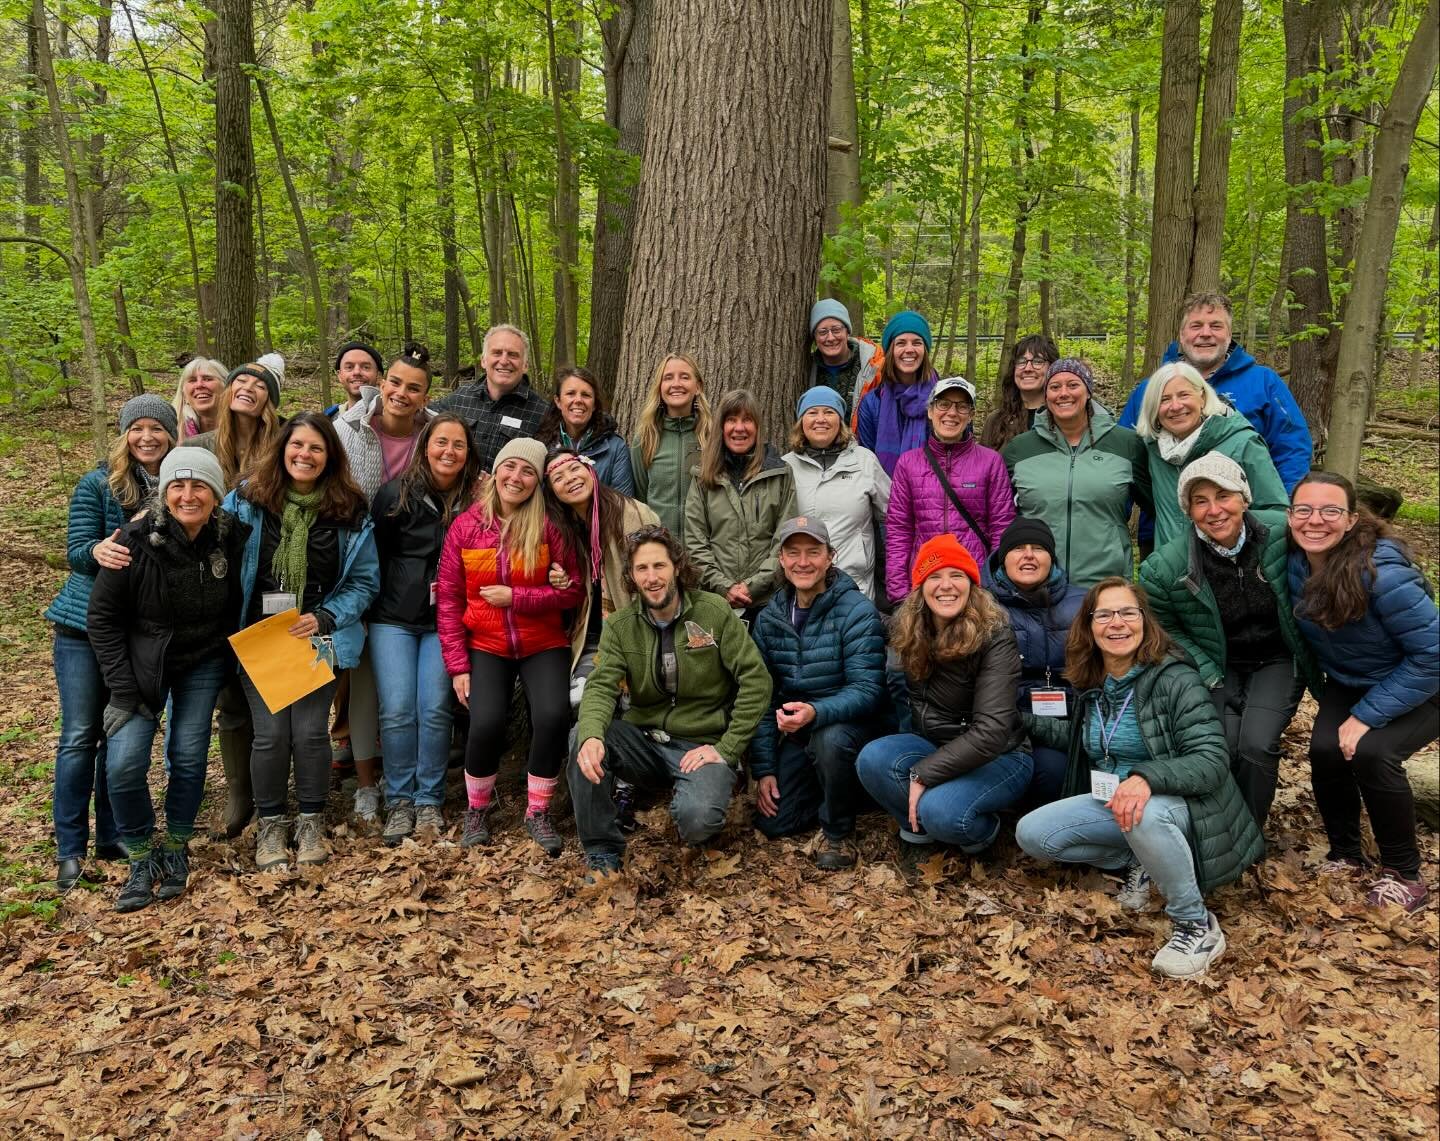 Our 14th cohort of Kripalu Mindful Outdoor Guides!!!
What an incredible group of human beings. I am so proud of them. They are heading out into the world today and they are going to do great things!